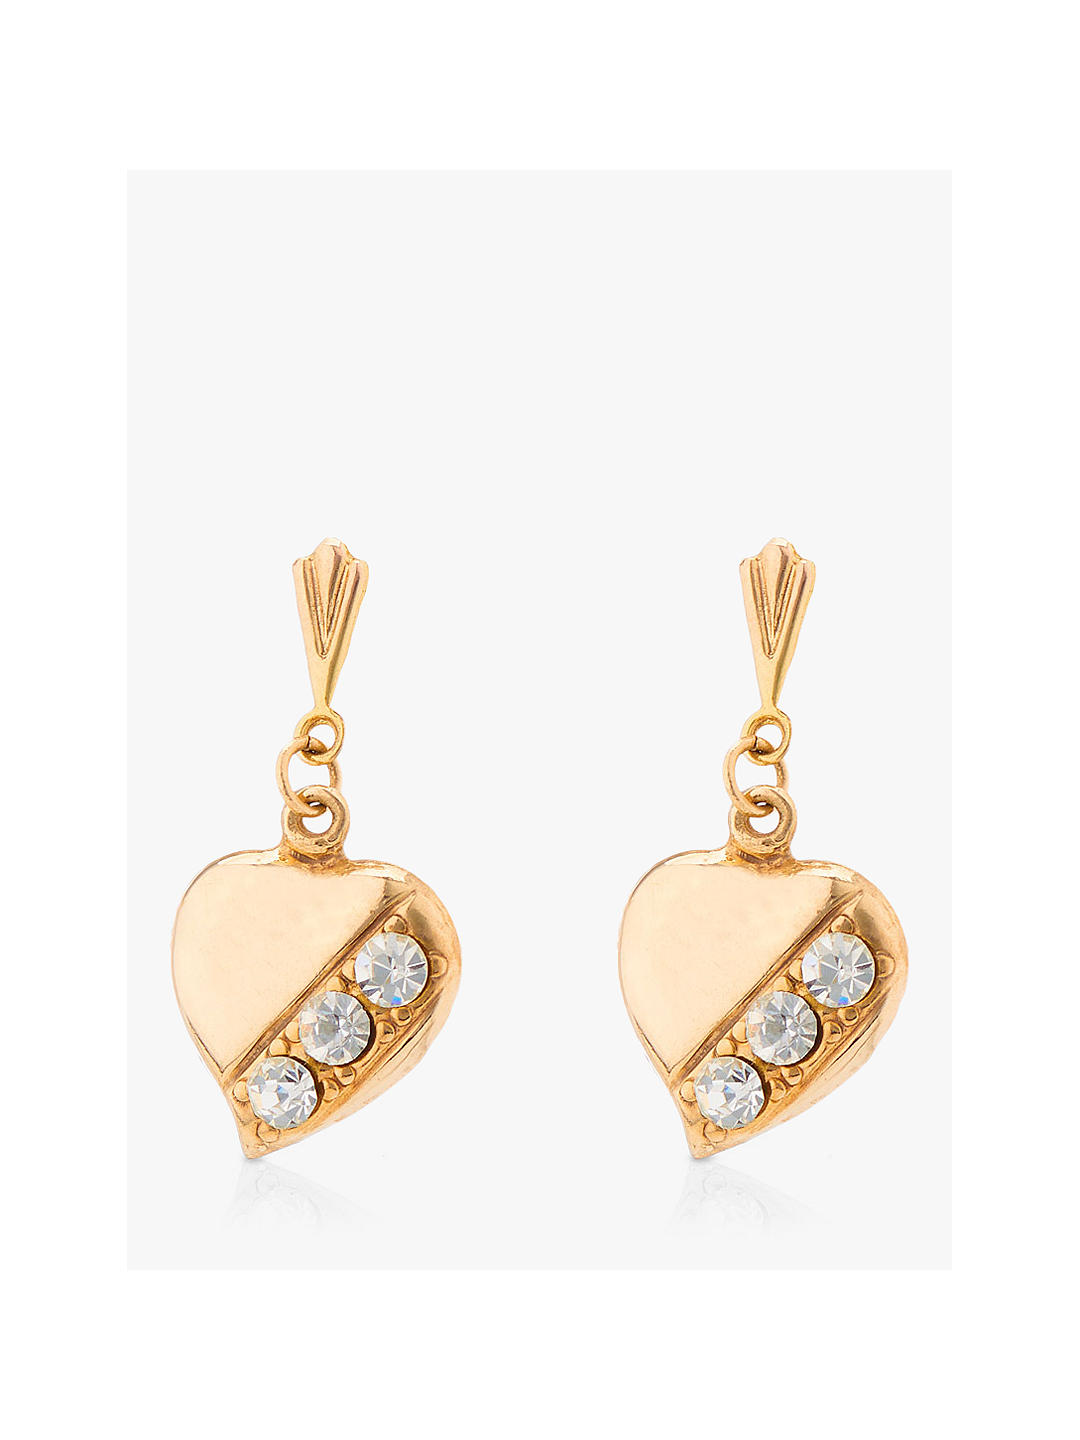 L & T Heirlooms 9ct Yellow Gold Second Hand Cubic Zirconia Heart Drop Earrings